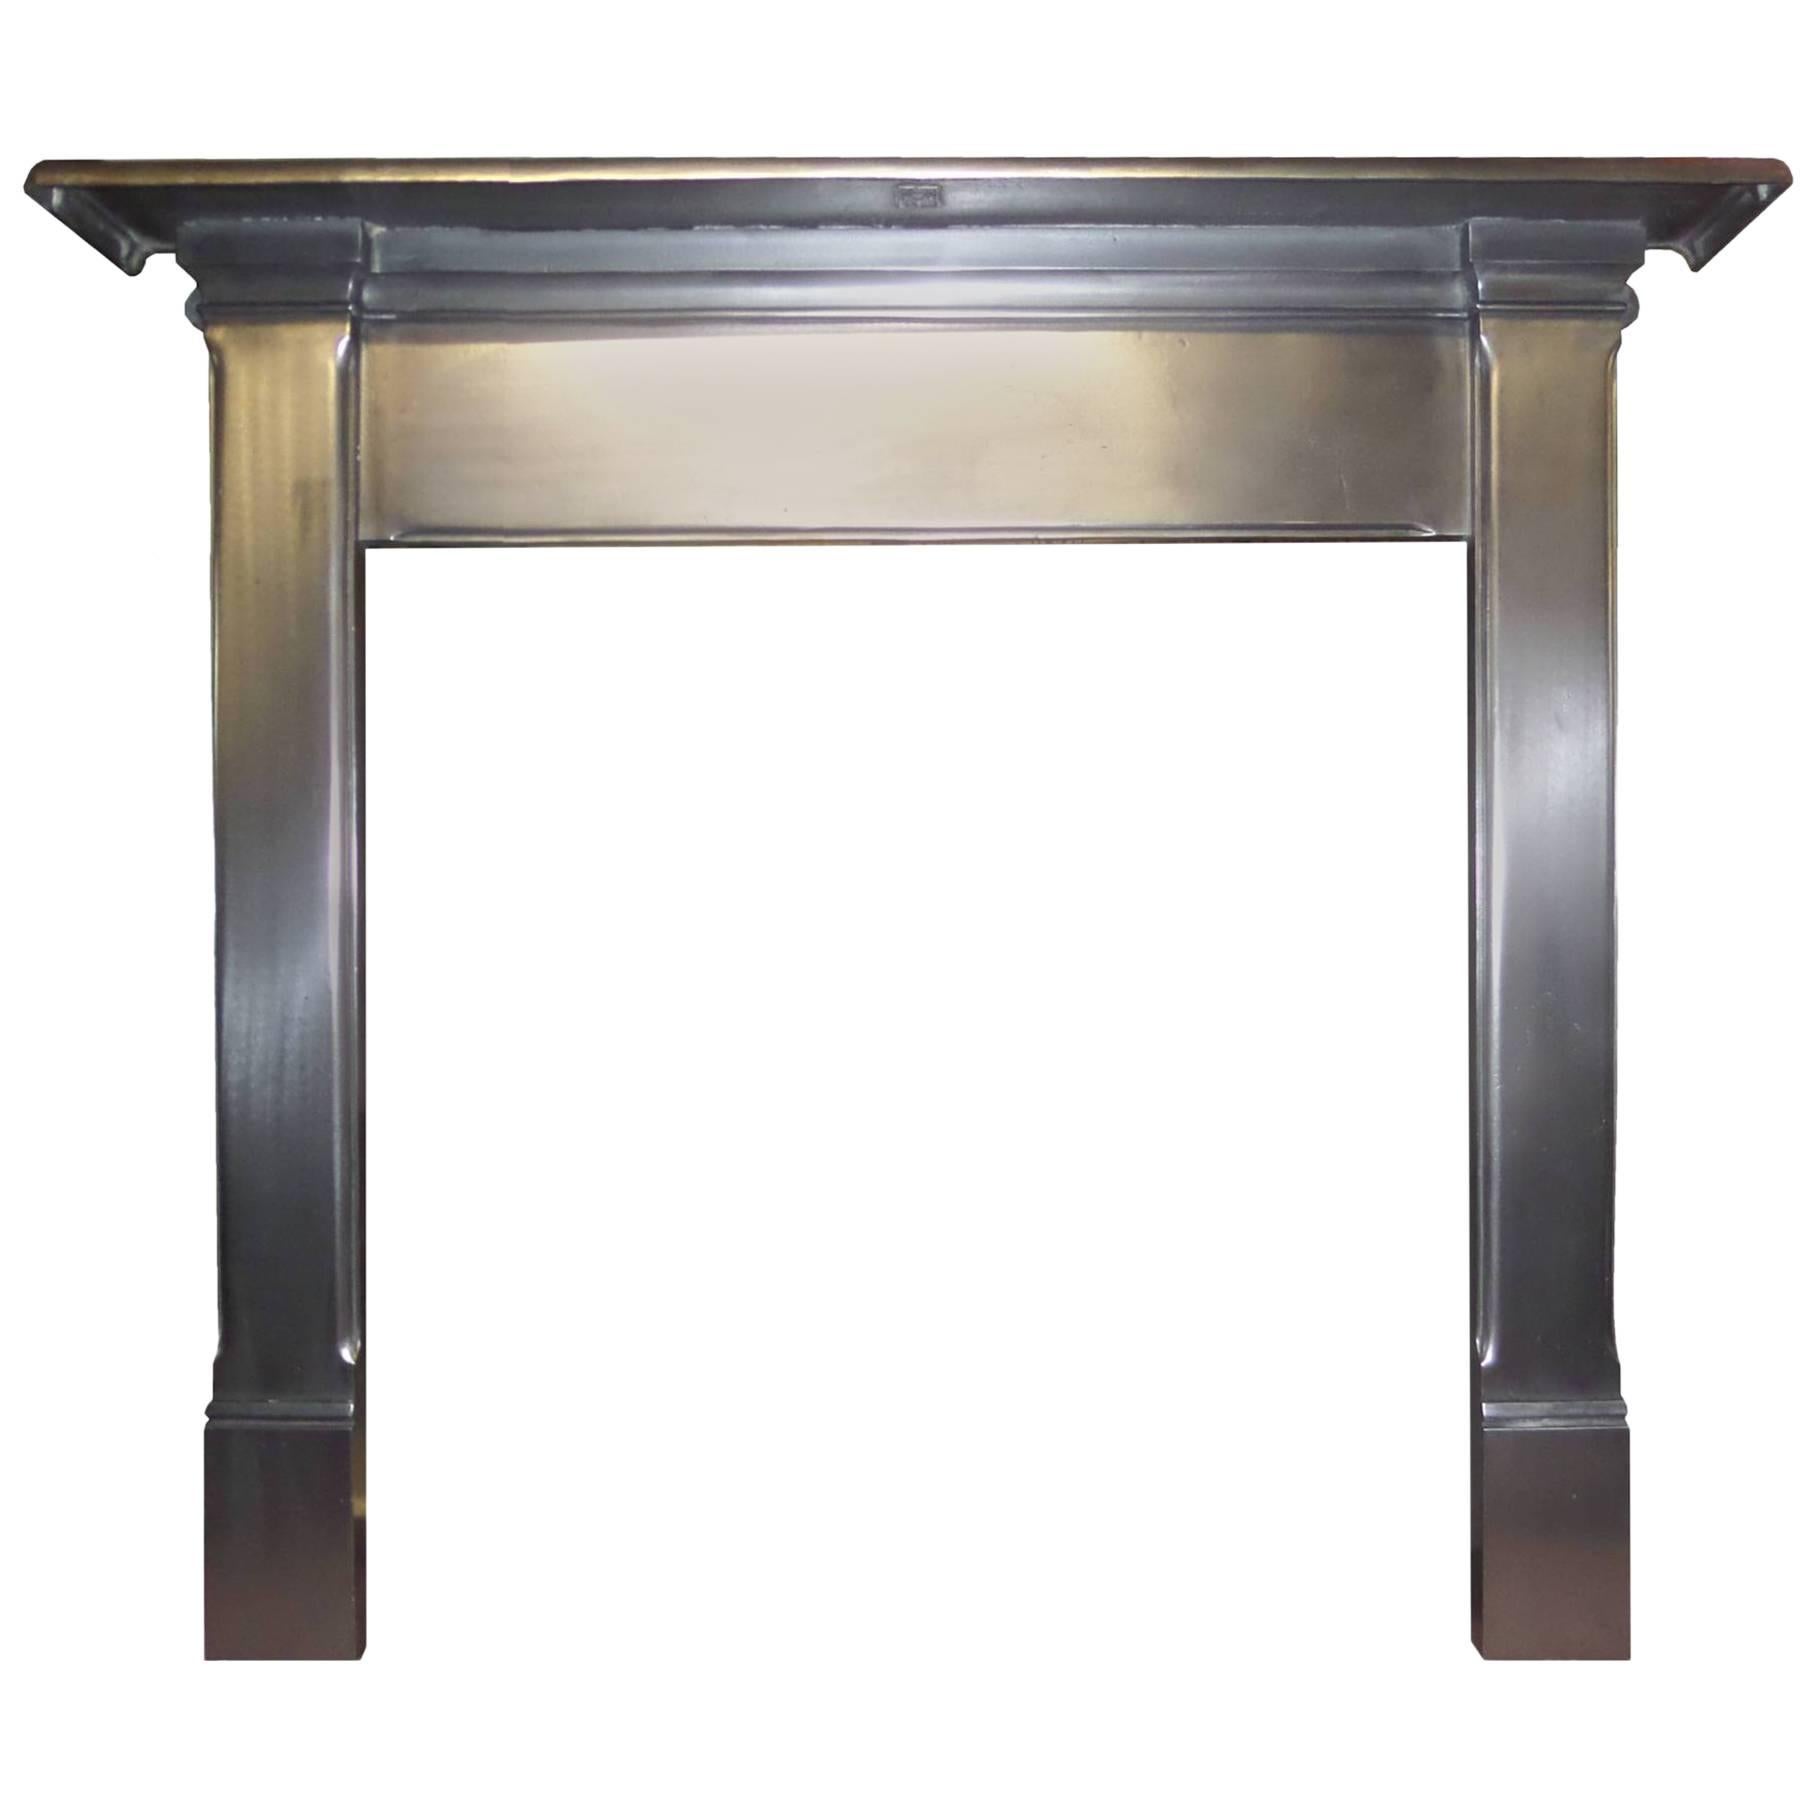  Art Deco 1930 Cast Iron Burnished Fireplace Mantel For Sale